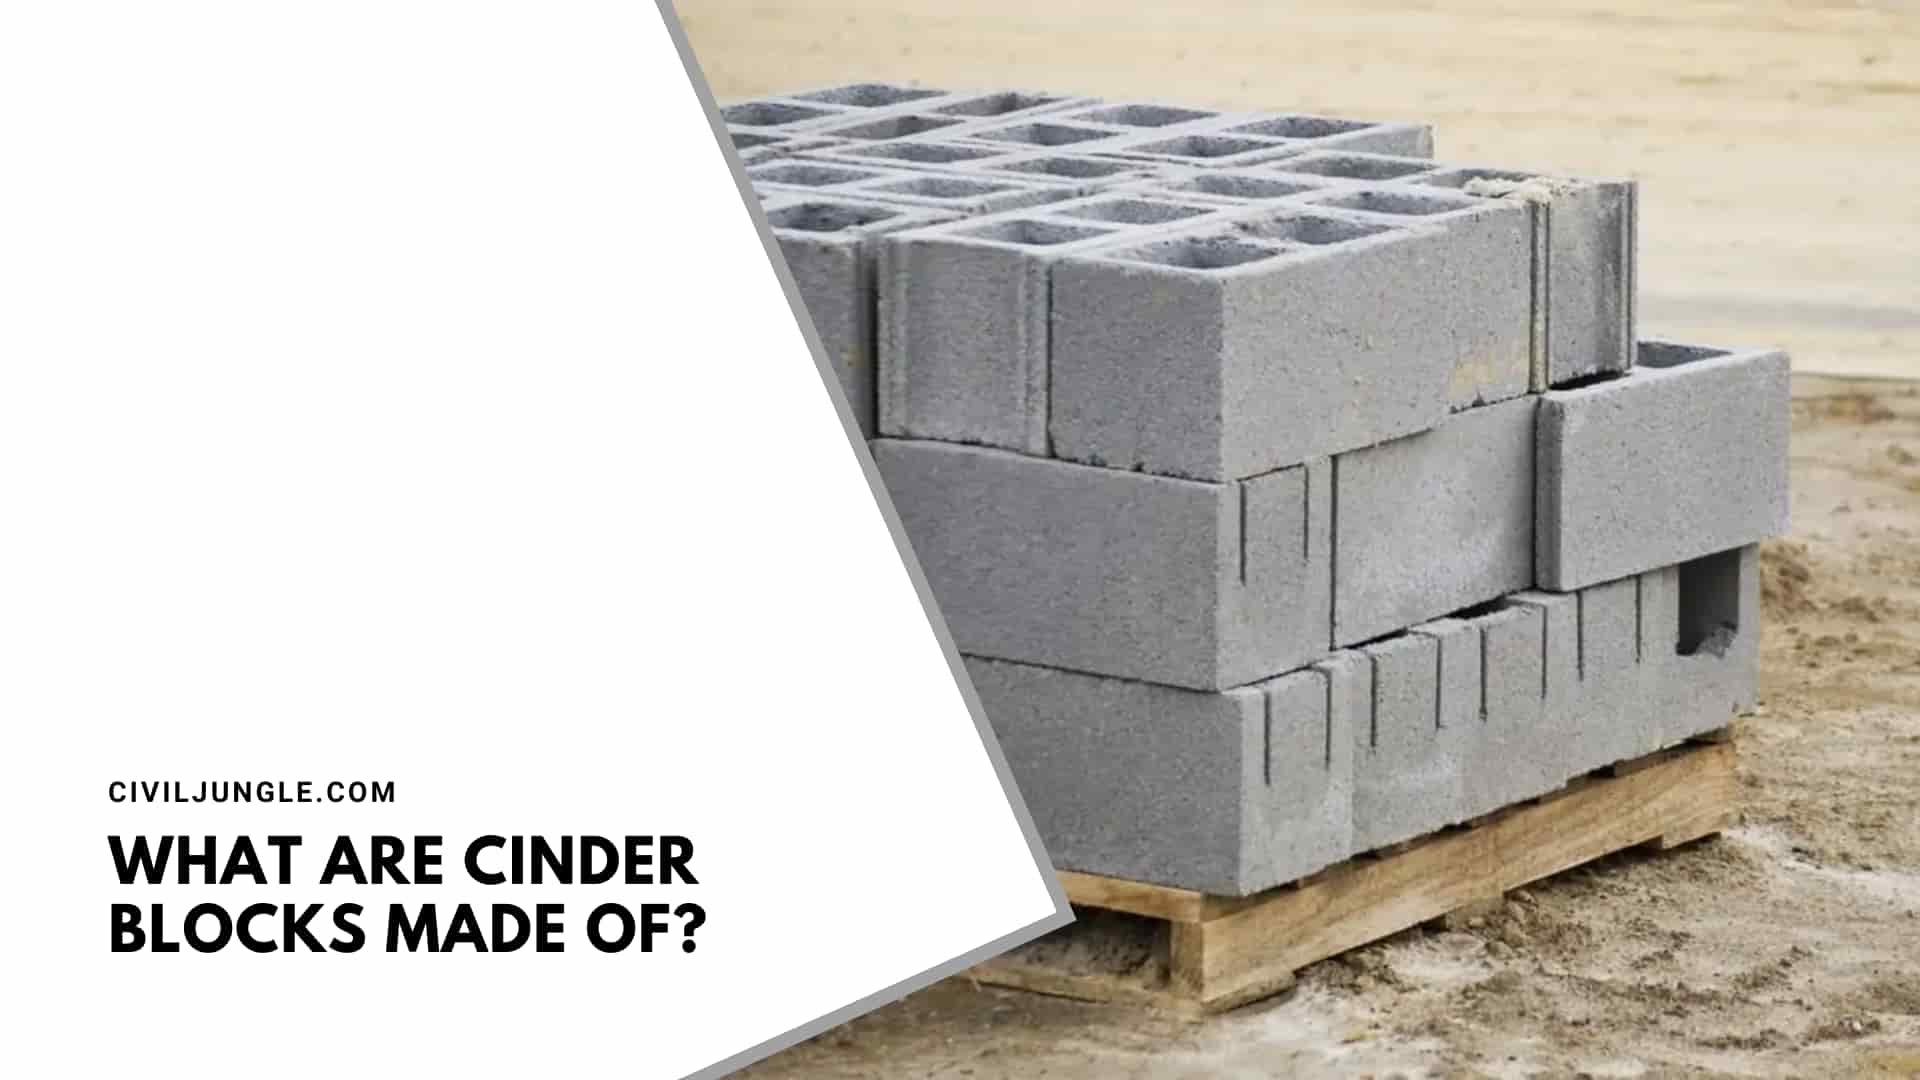 What Are Cinder Blocks Made Of?